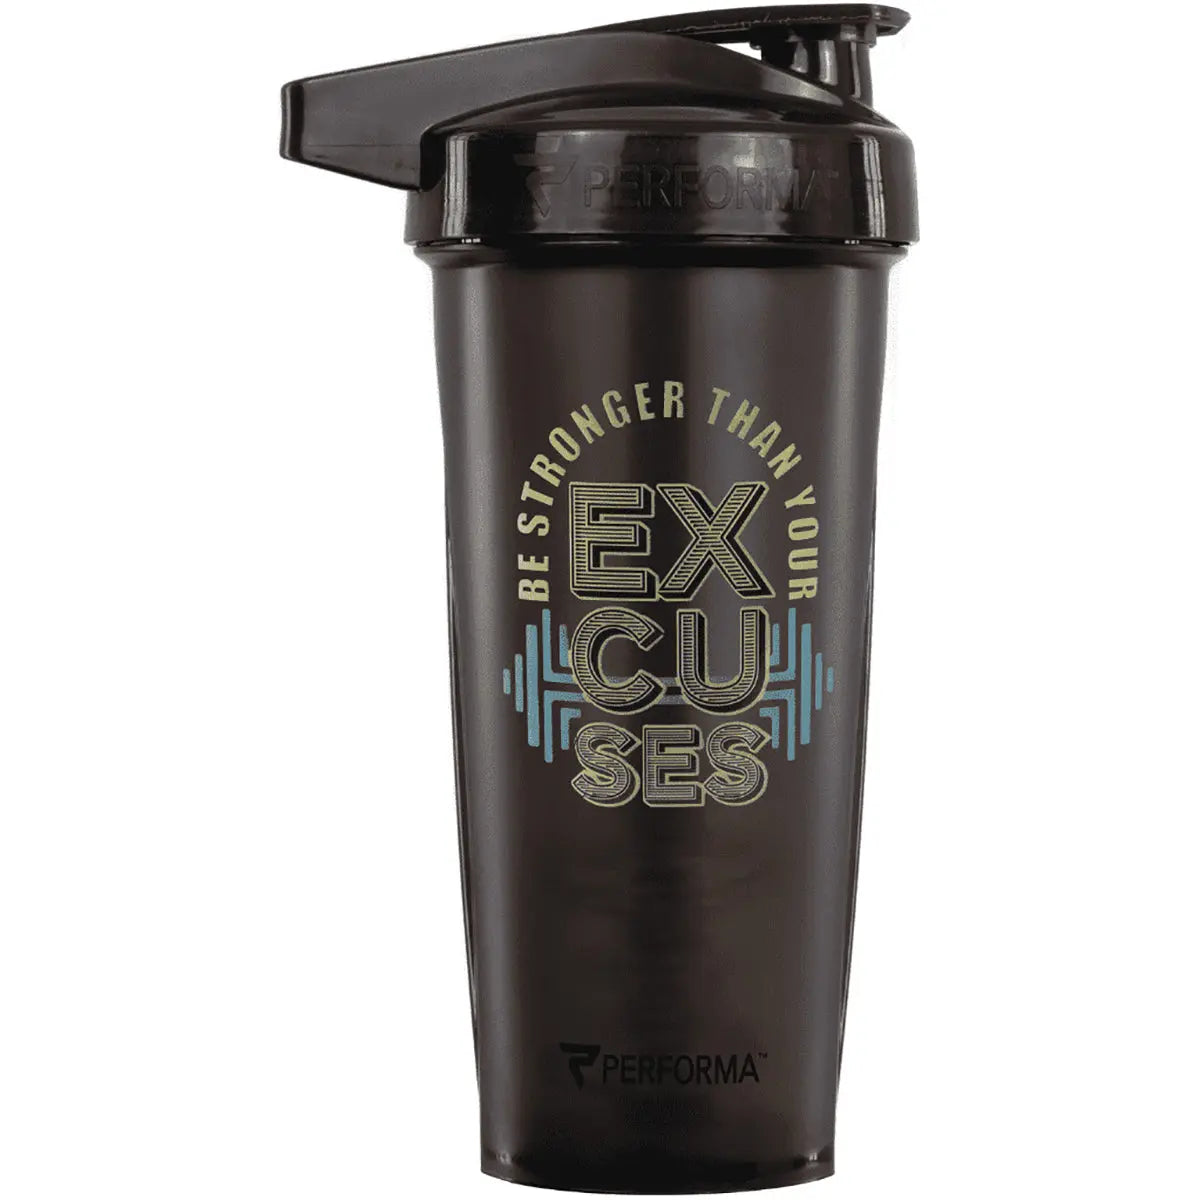 Performa Activ 28 oz. Shaker Cup Gym Bottle - No Excuses Performa